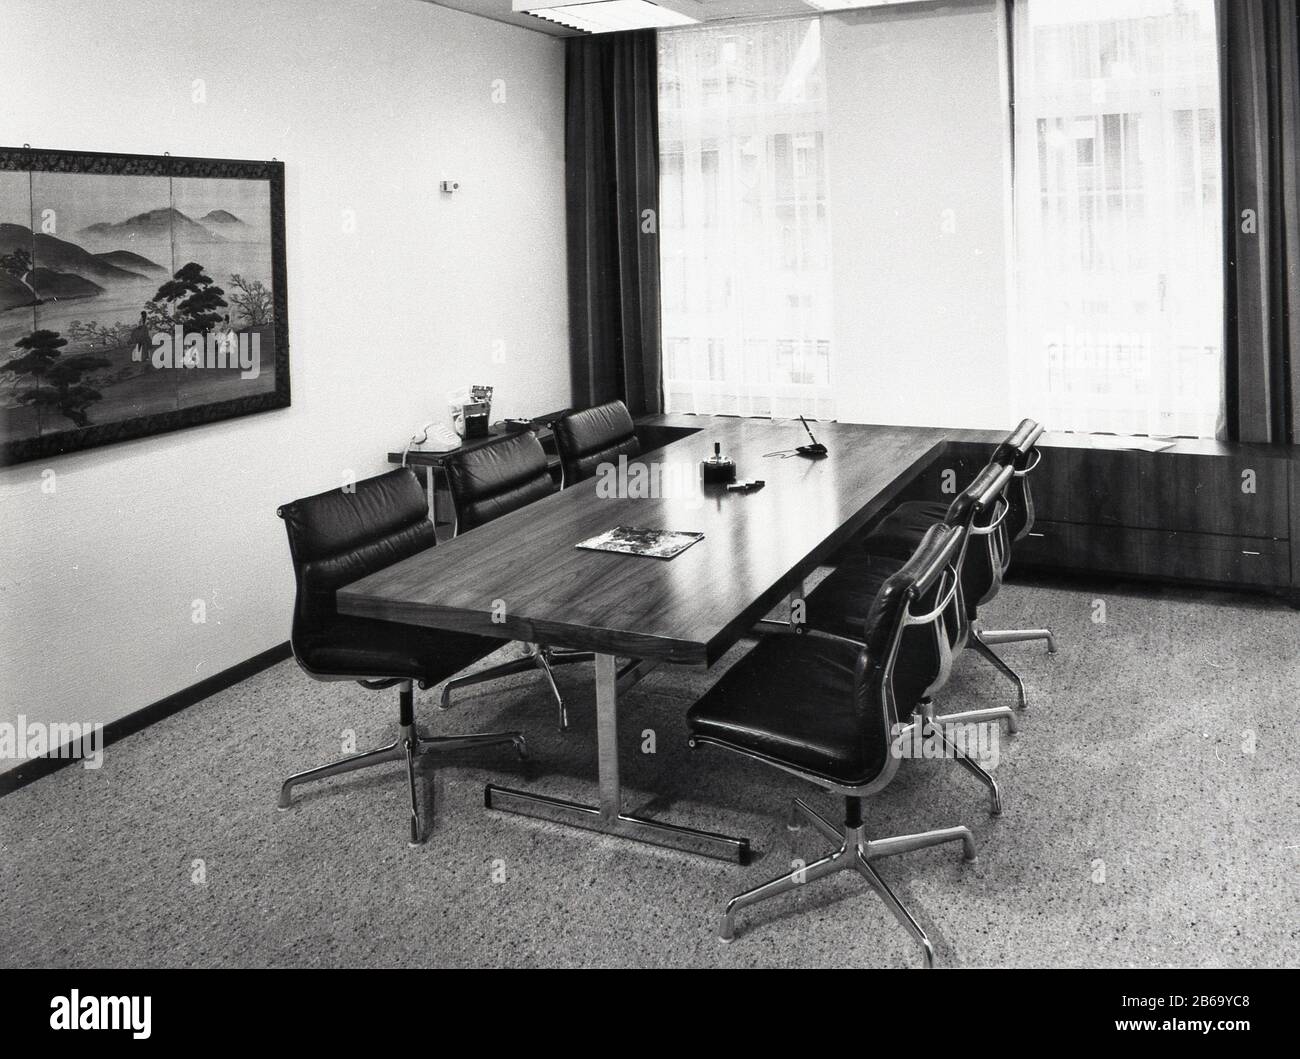 1970s, office meeting room with shiny wooden table with chrome metal legs and chrome metal swivel chairs of the era, Swiss Banking Corporation, Berne, Switzerland. Stock Photo